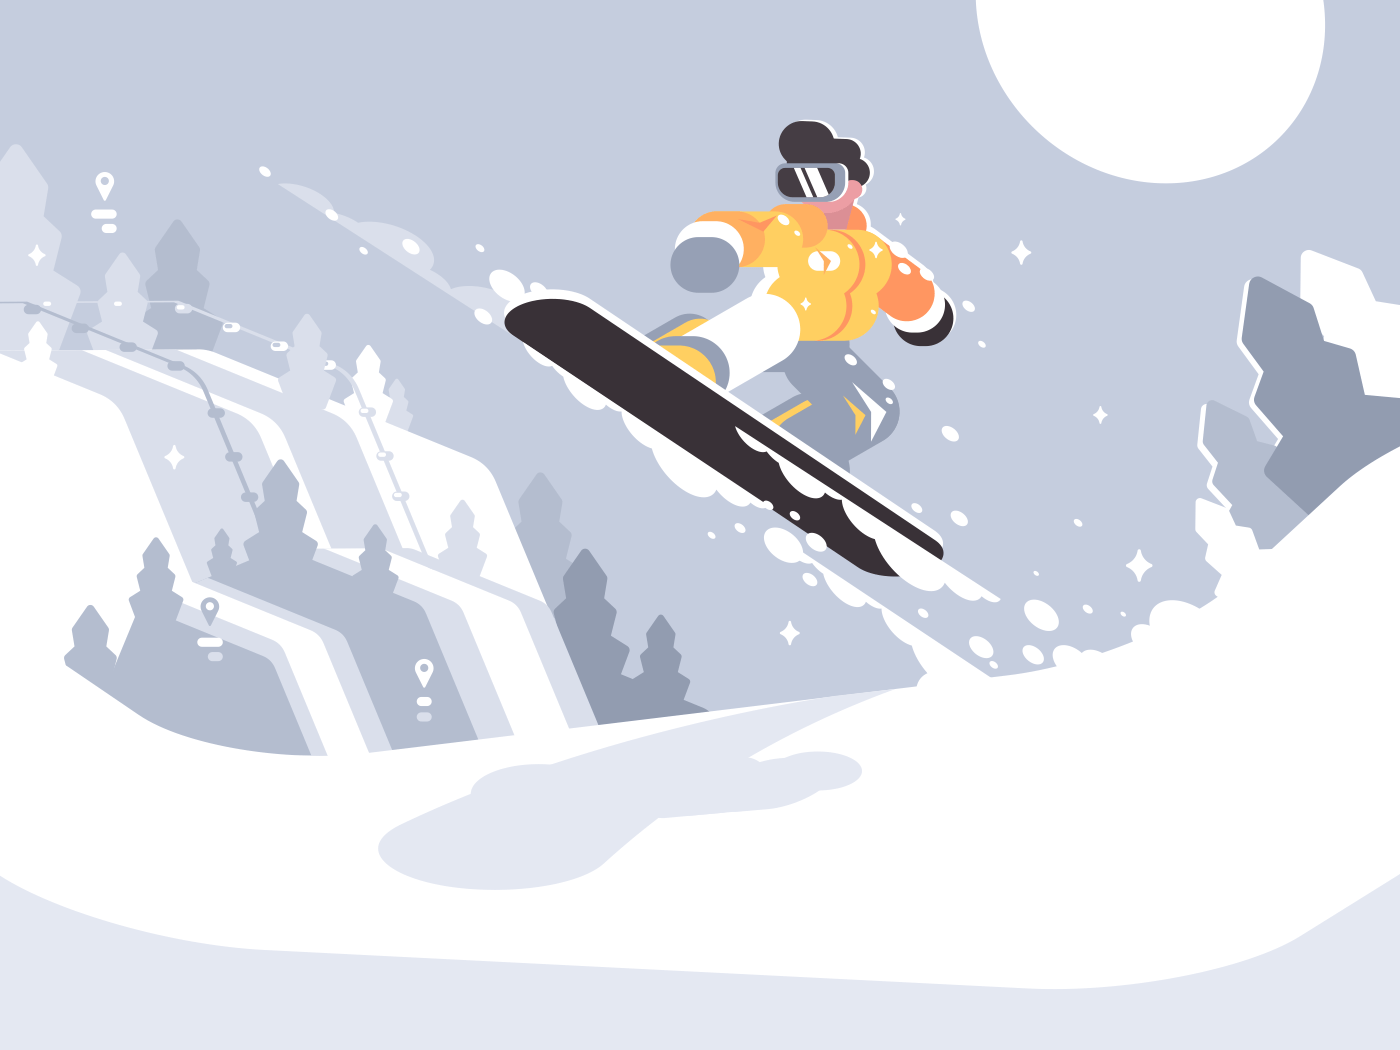 Snowboarder guy snowboarding on snowy winter slope and jump. Vector illustration